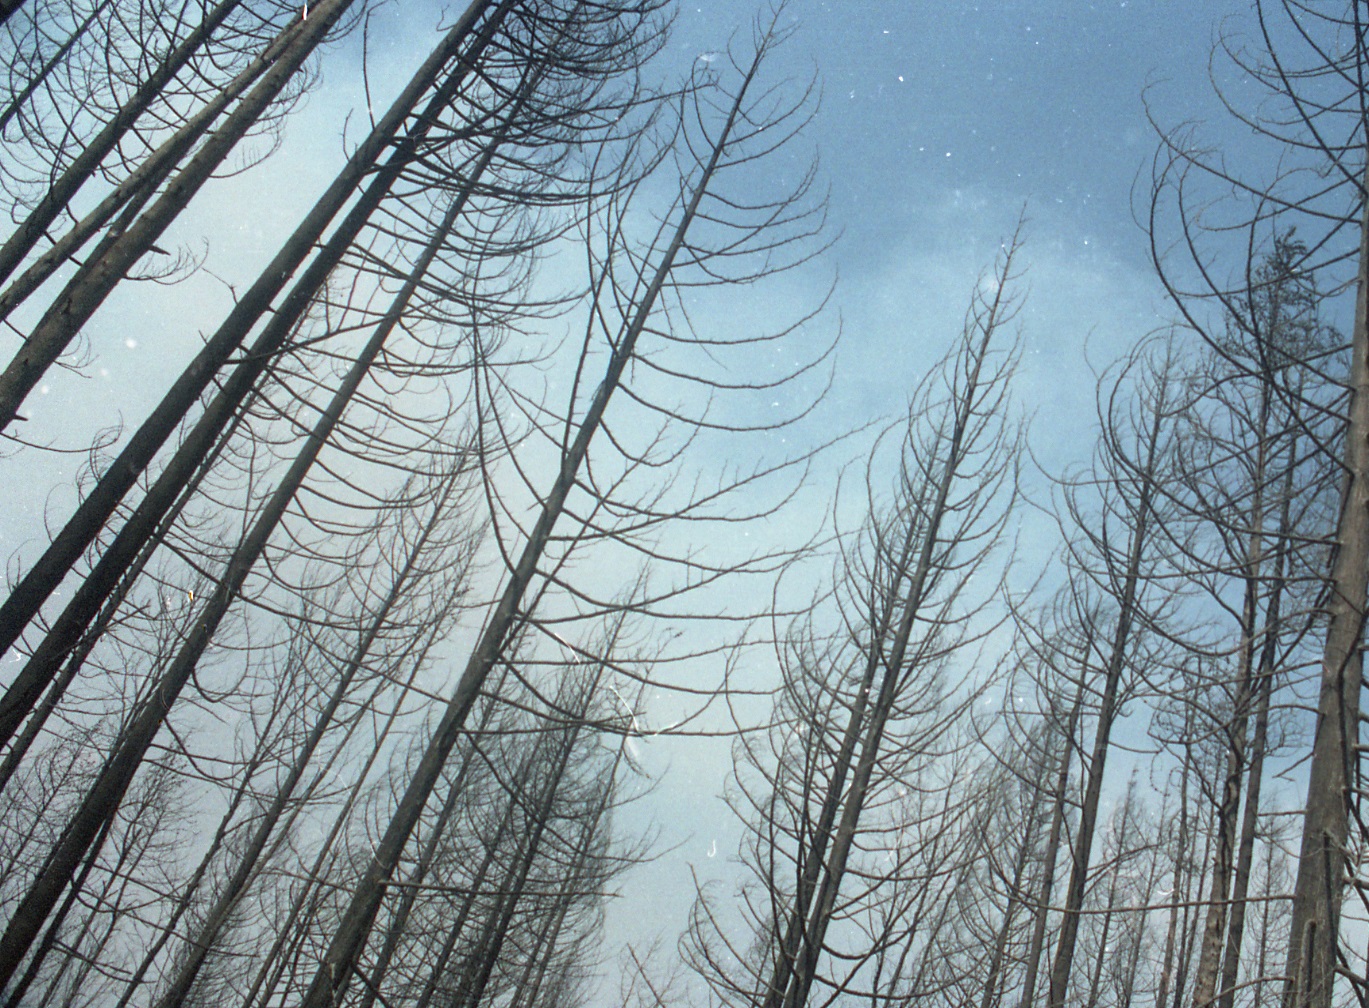 Stand of trees in a forest, burned.